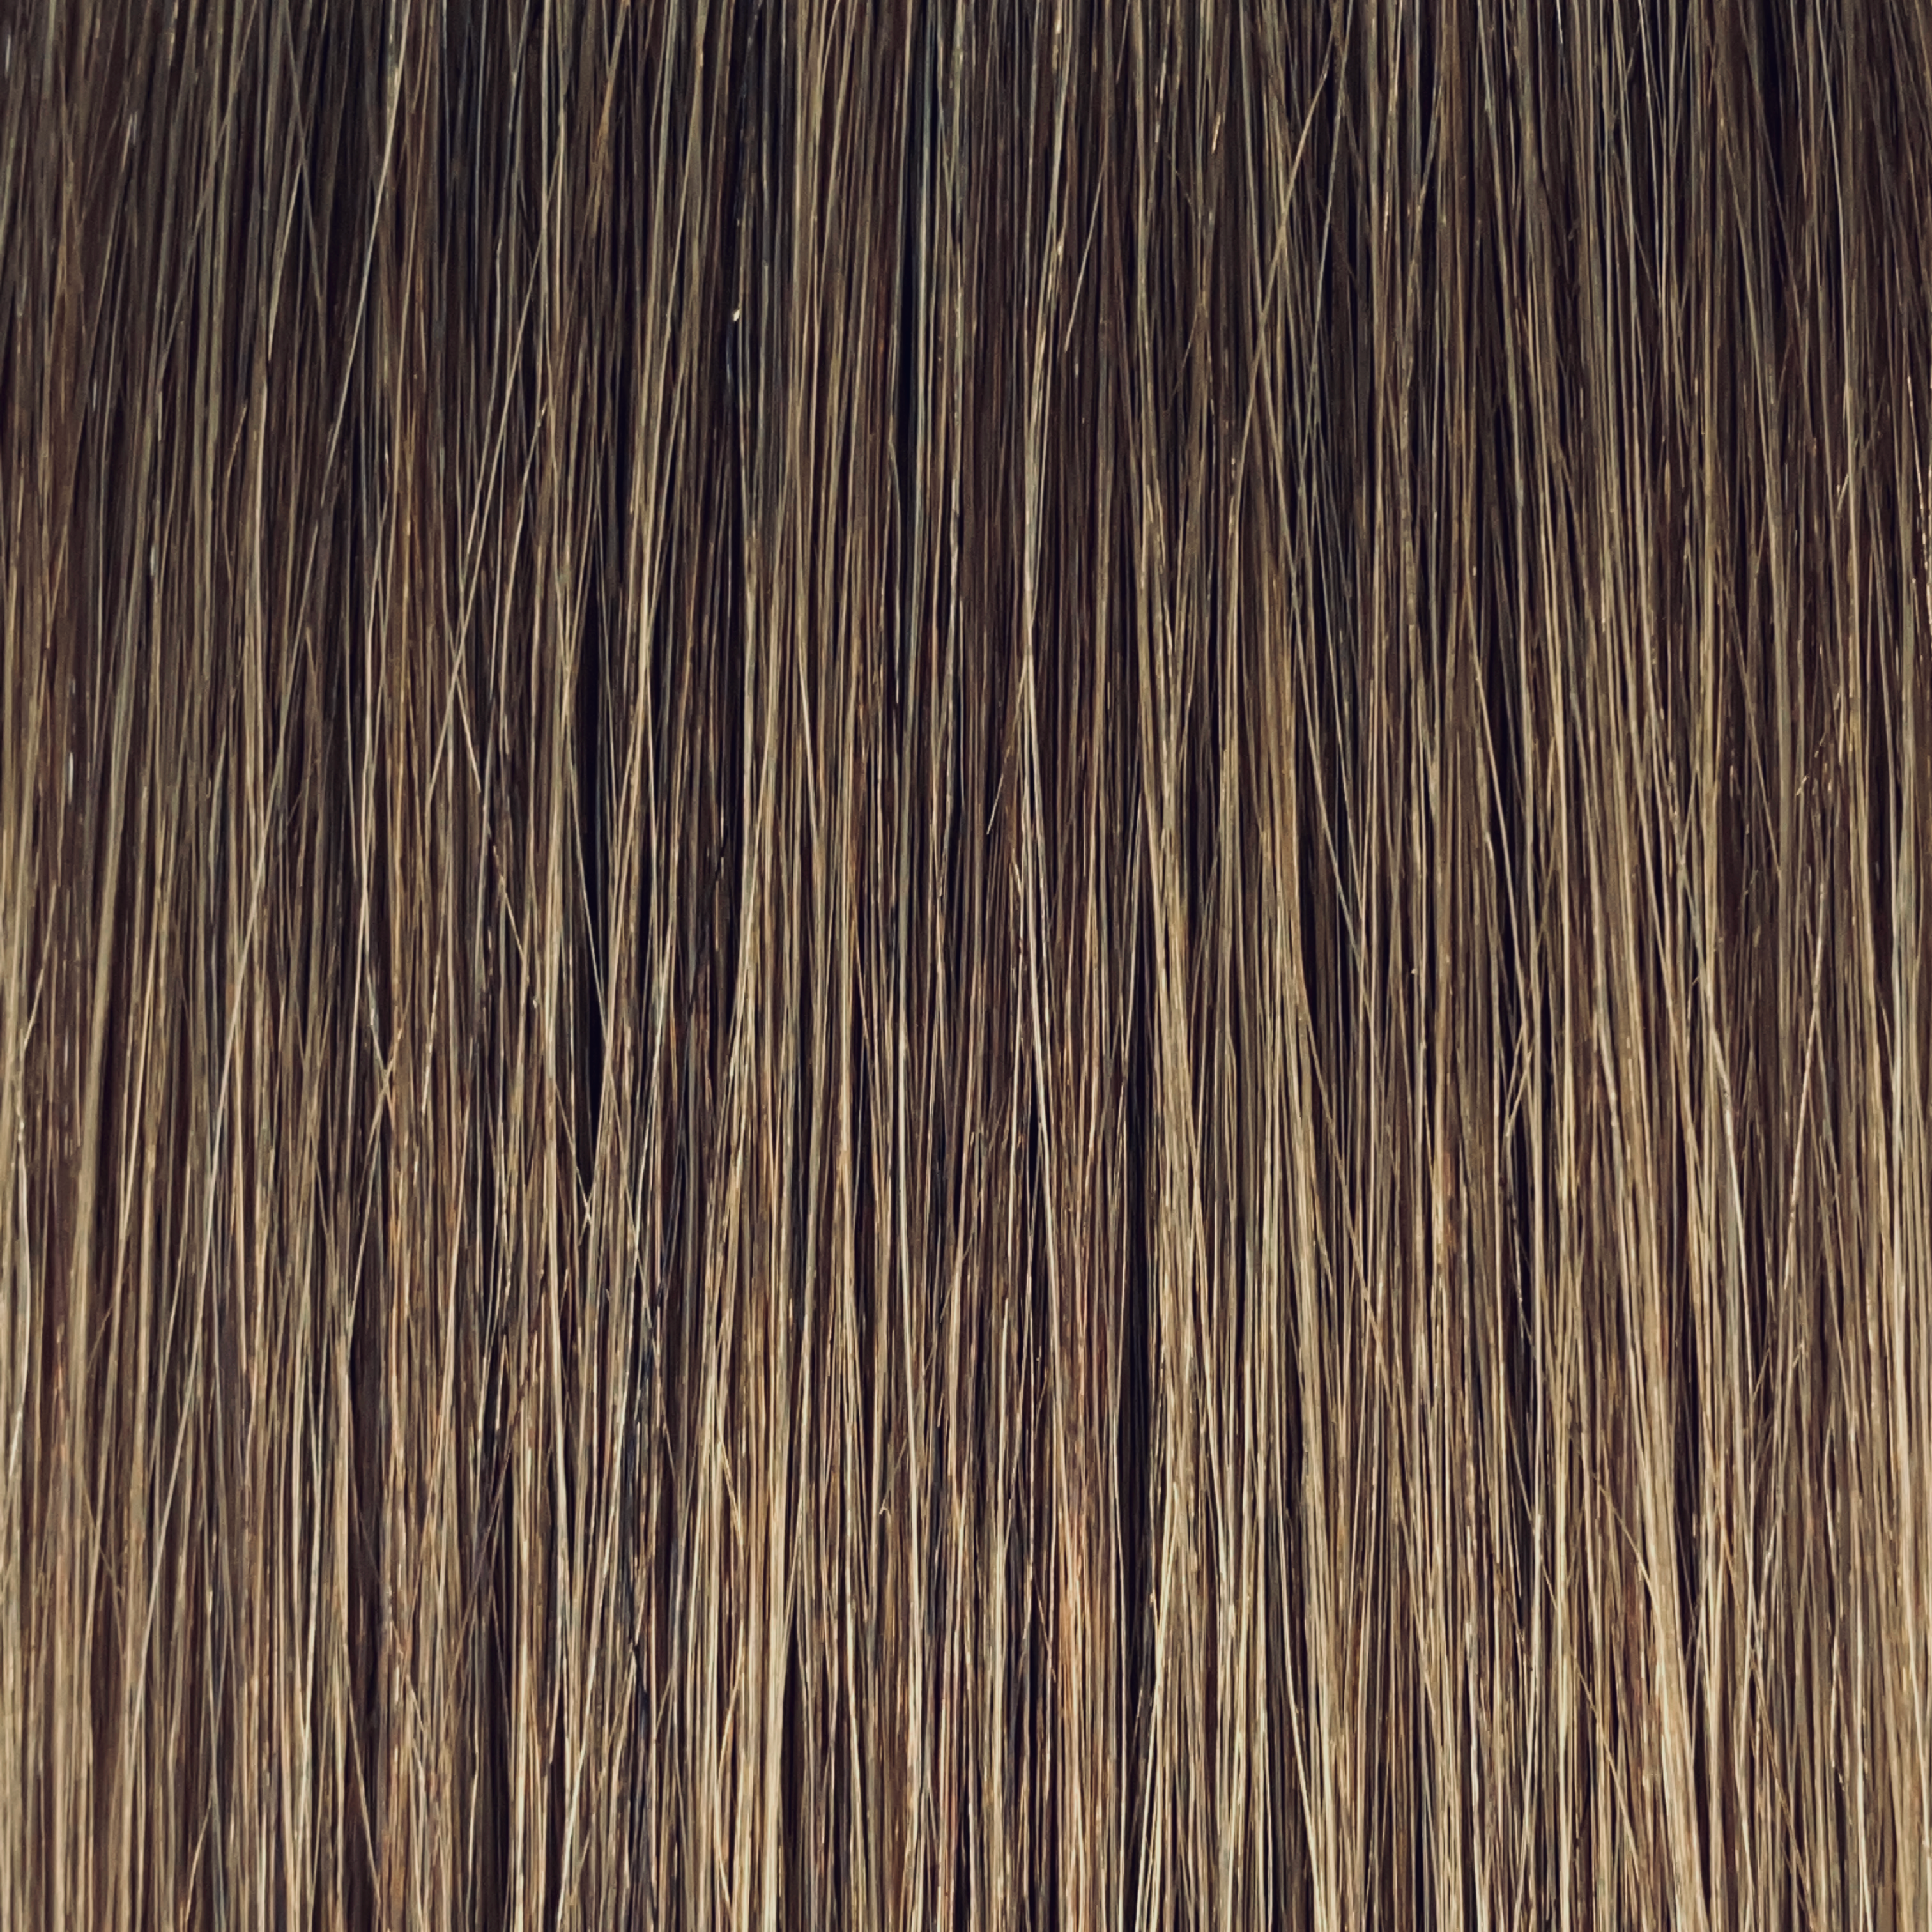 40 cm | Normal Tape Extensions | No. 07 ash brown